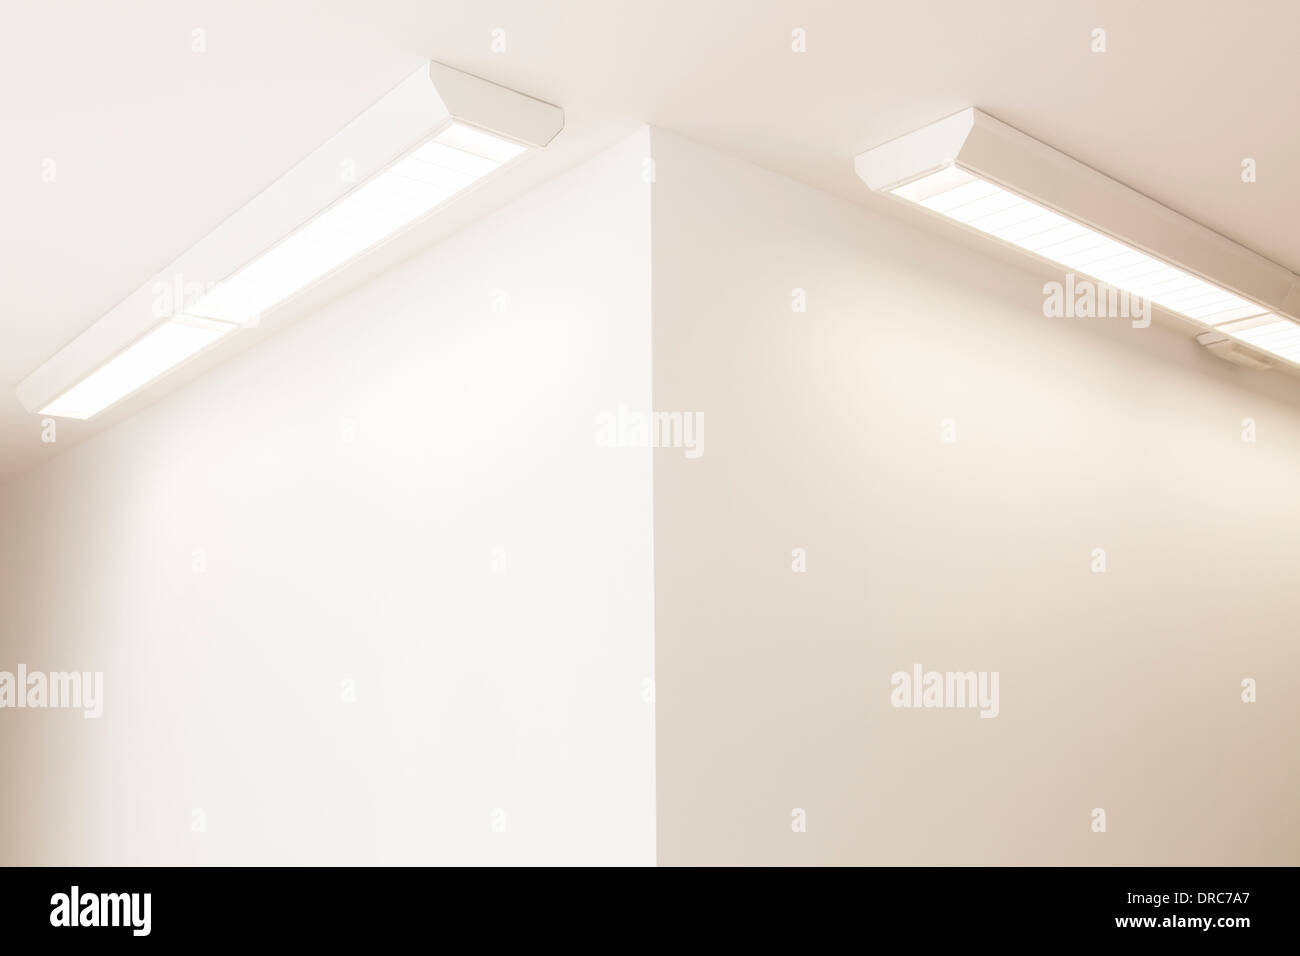 Ceiling Lights In Corner Of Office Stock Photo 66037391 Alamy